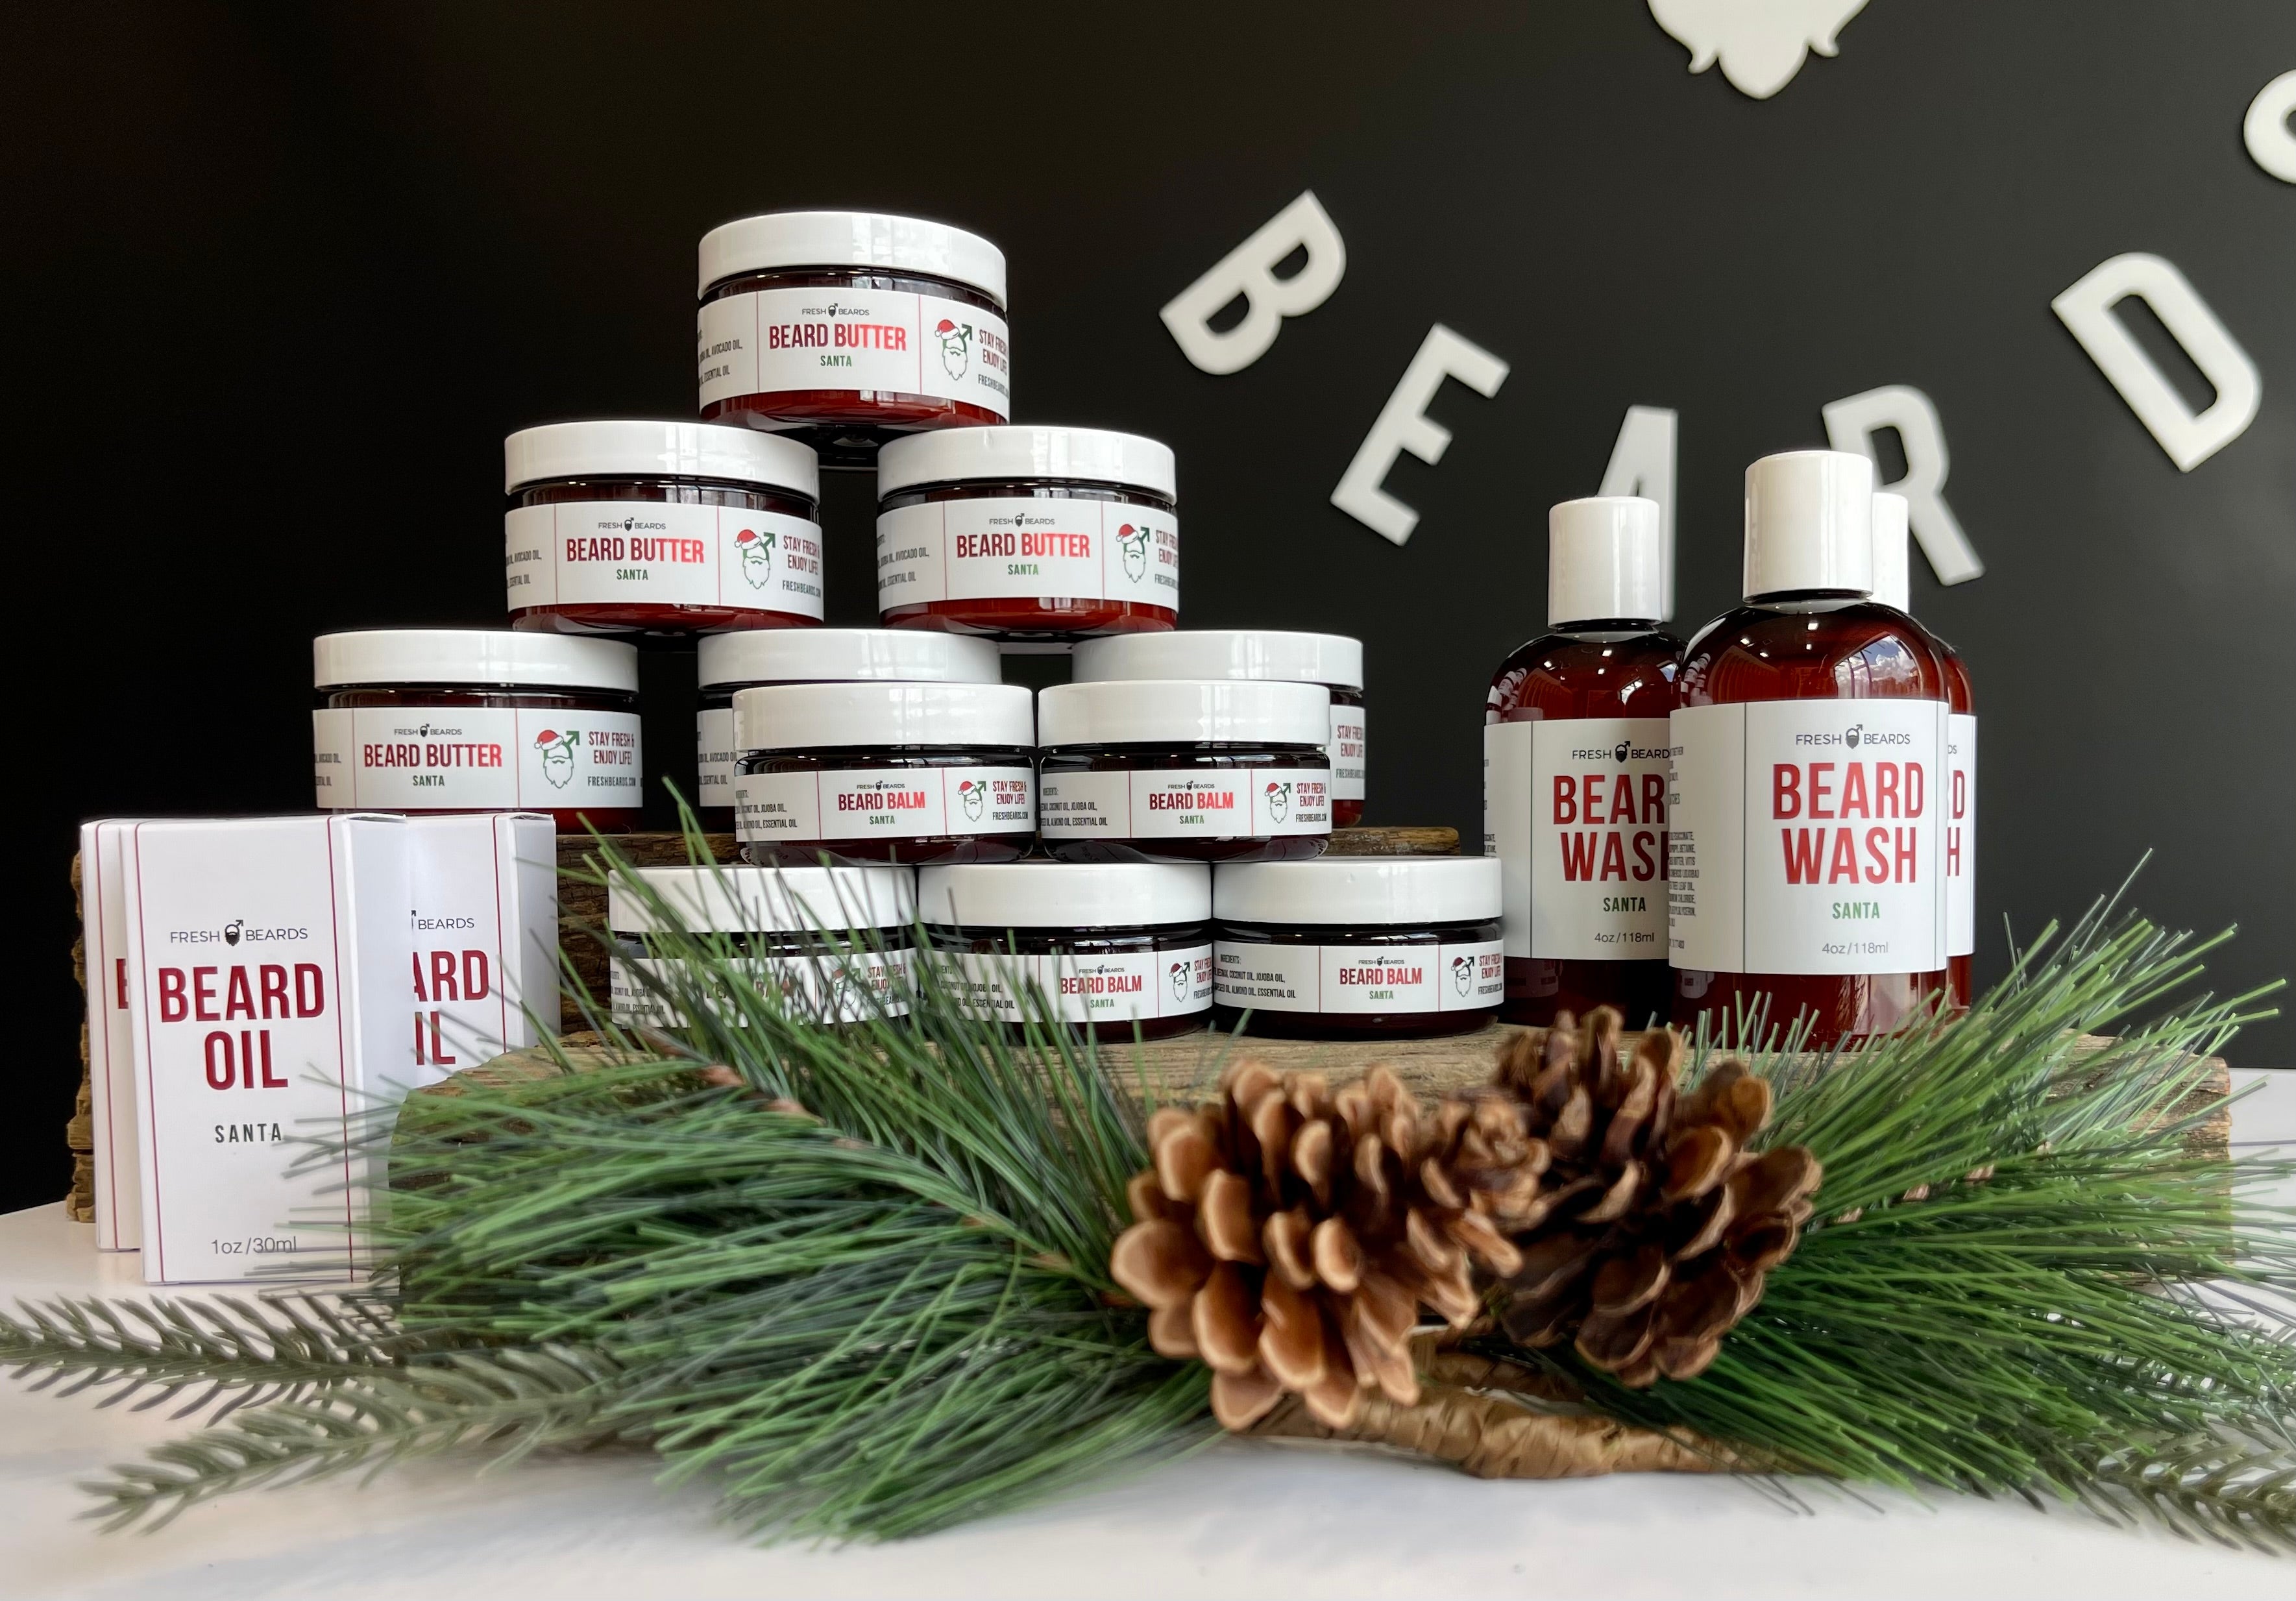 The 2022 Fresh Beards' Holiday Gift Guide